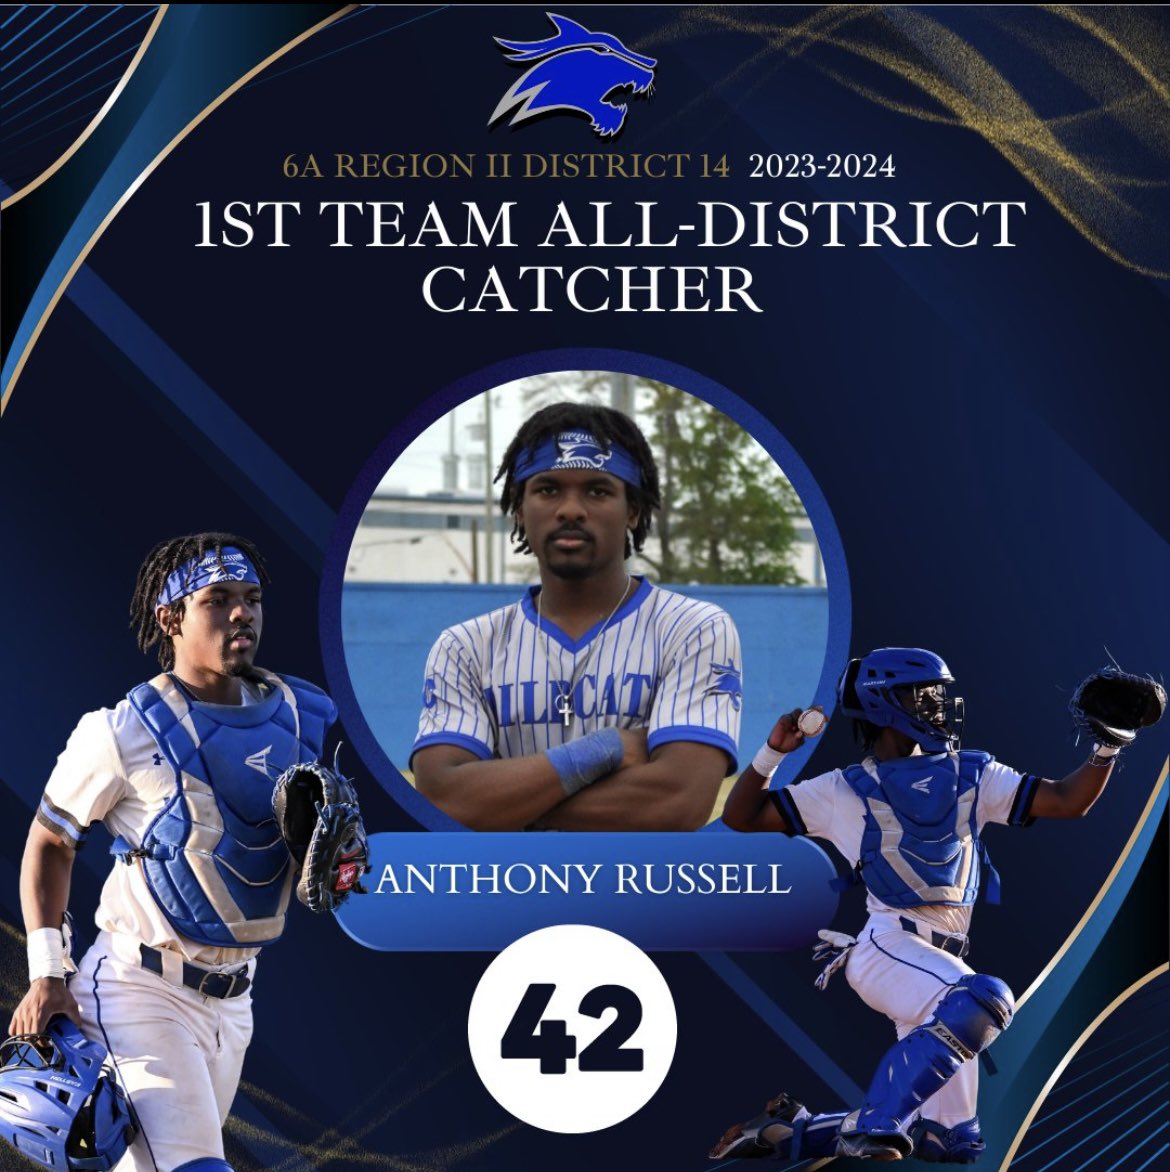 Way to go babe! We’re so proud of you. Four years in a row. Keep up the great work @AnthonyIRussell. @arussell0808 @therealJbal #42 #catcher